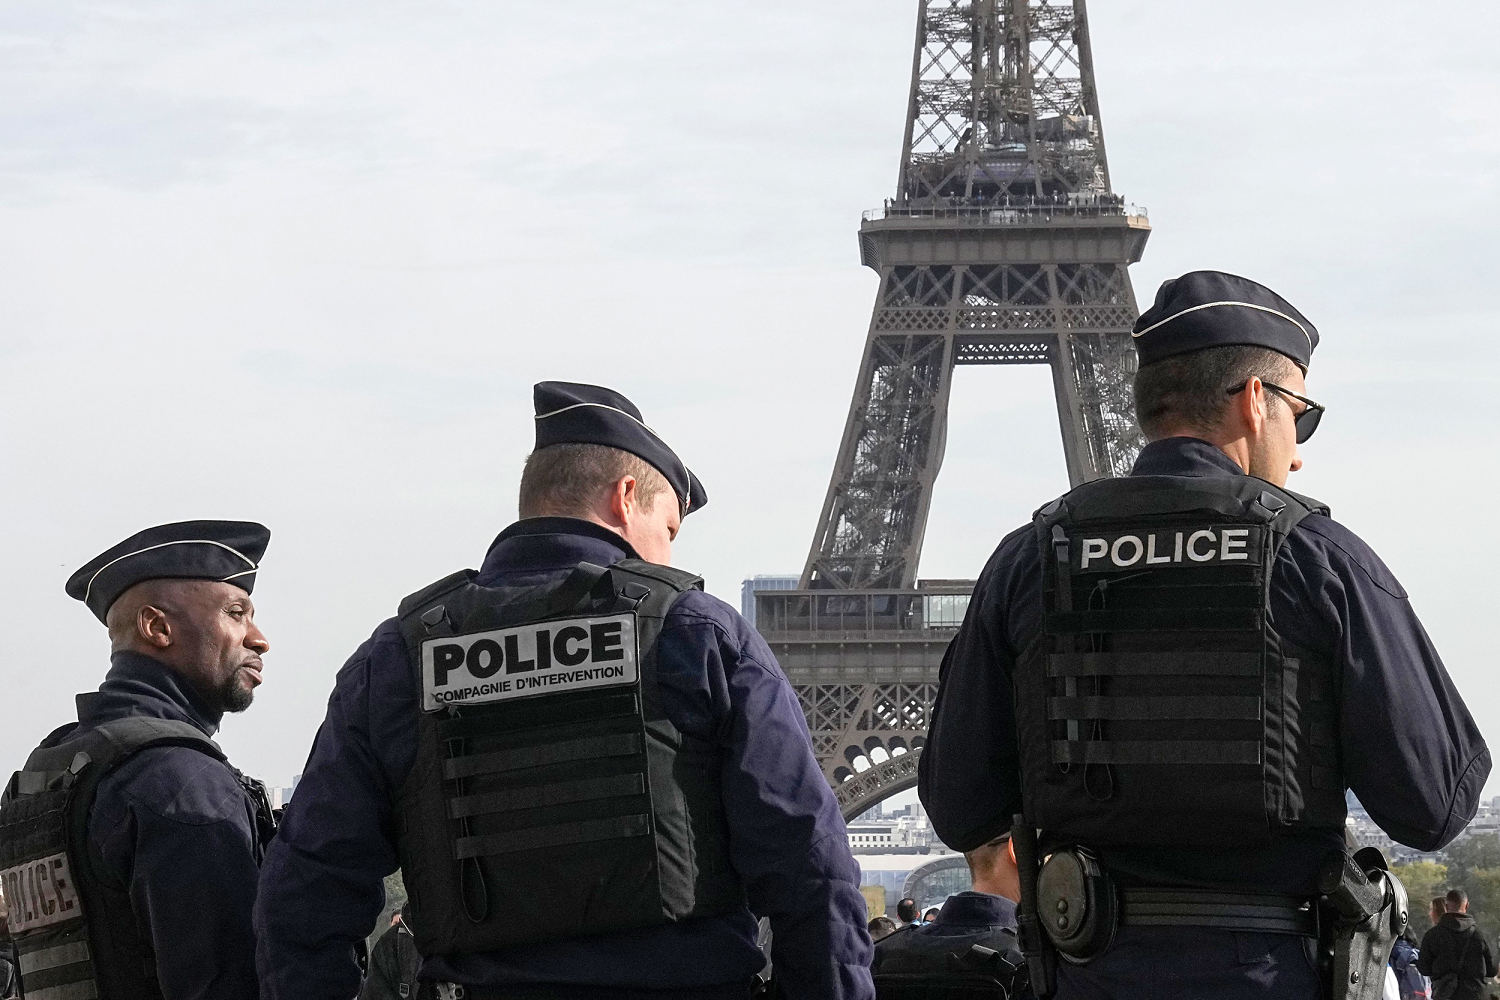 Chechnya teen was planning to attack soccer events during the Paris Olympics, officials say